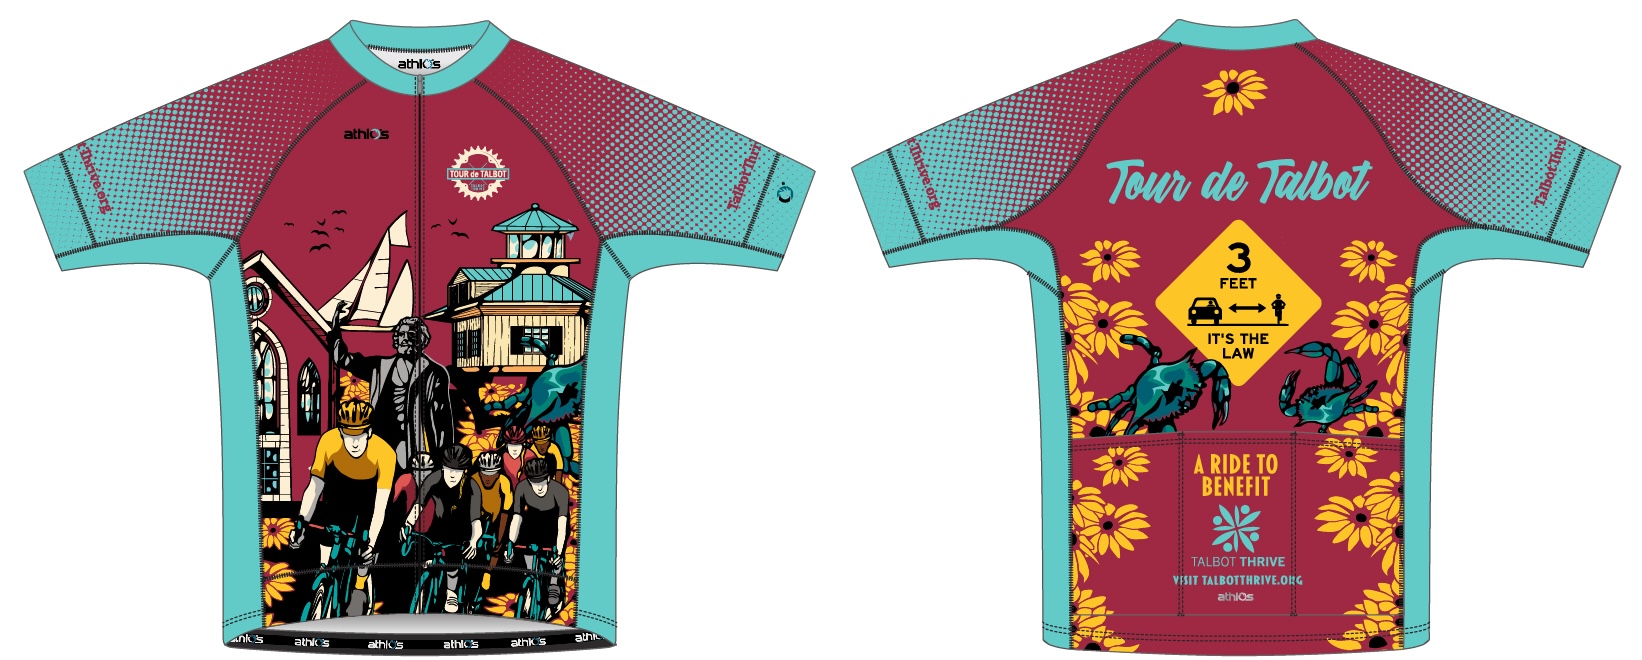 Ride Jersey